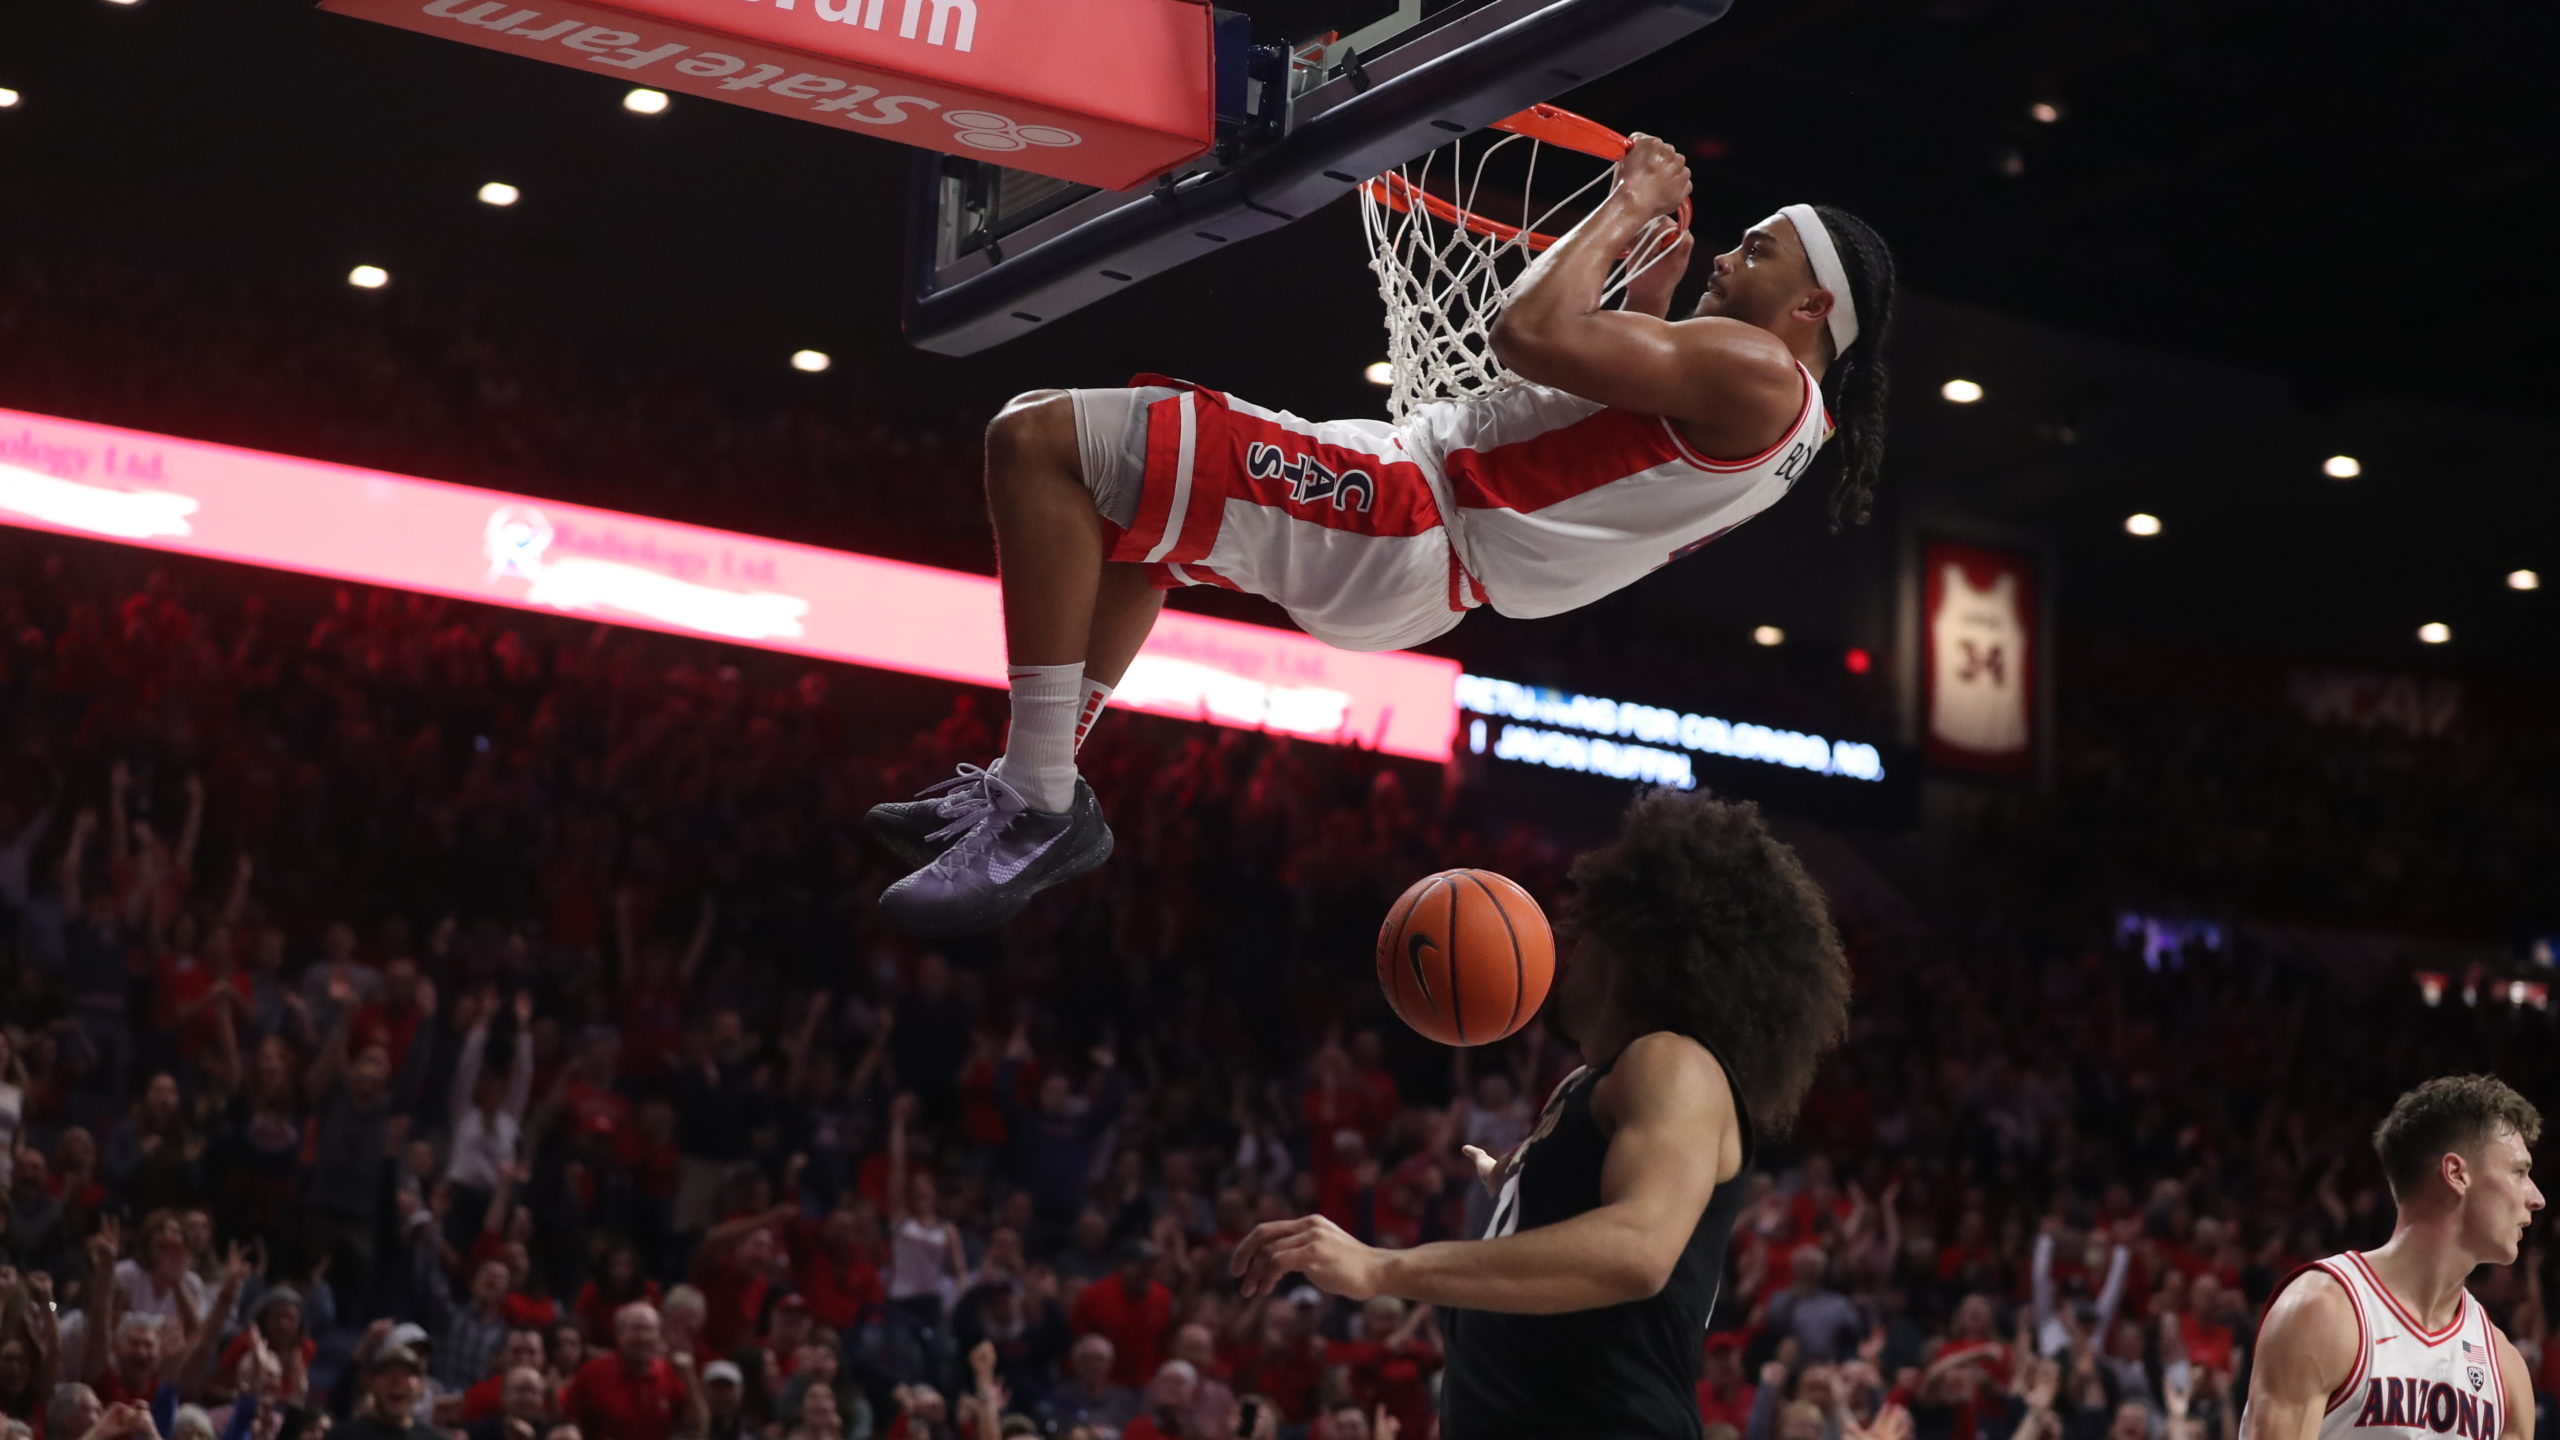 Arizona Wildcats guard Kylan Boswell #4 gets a technical foul for hanging on the rim after a dunk d...